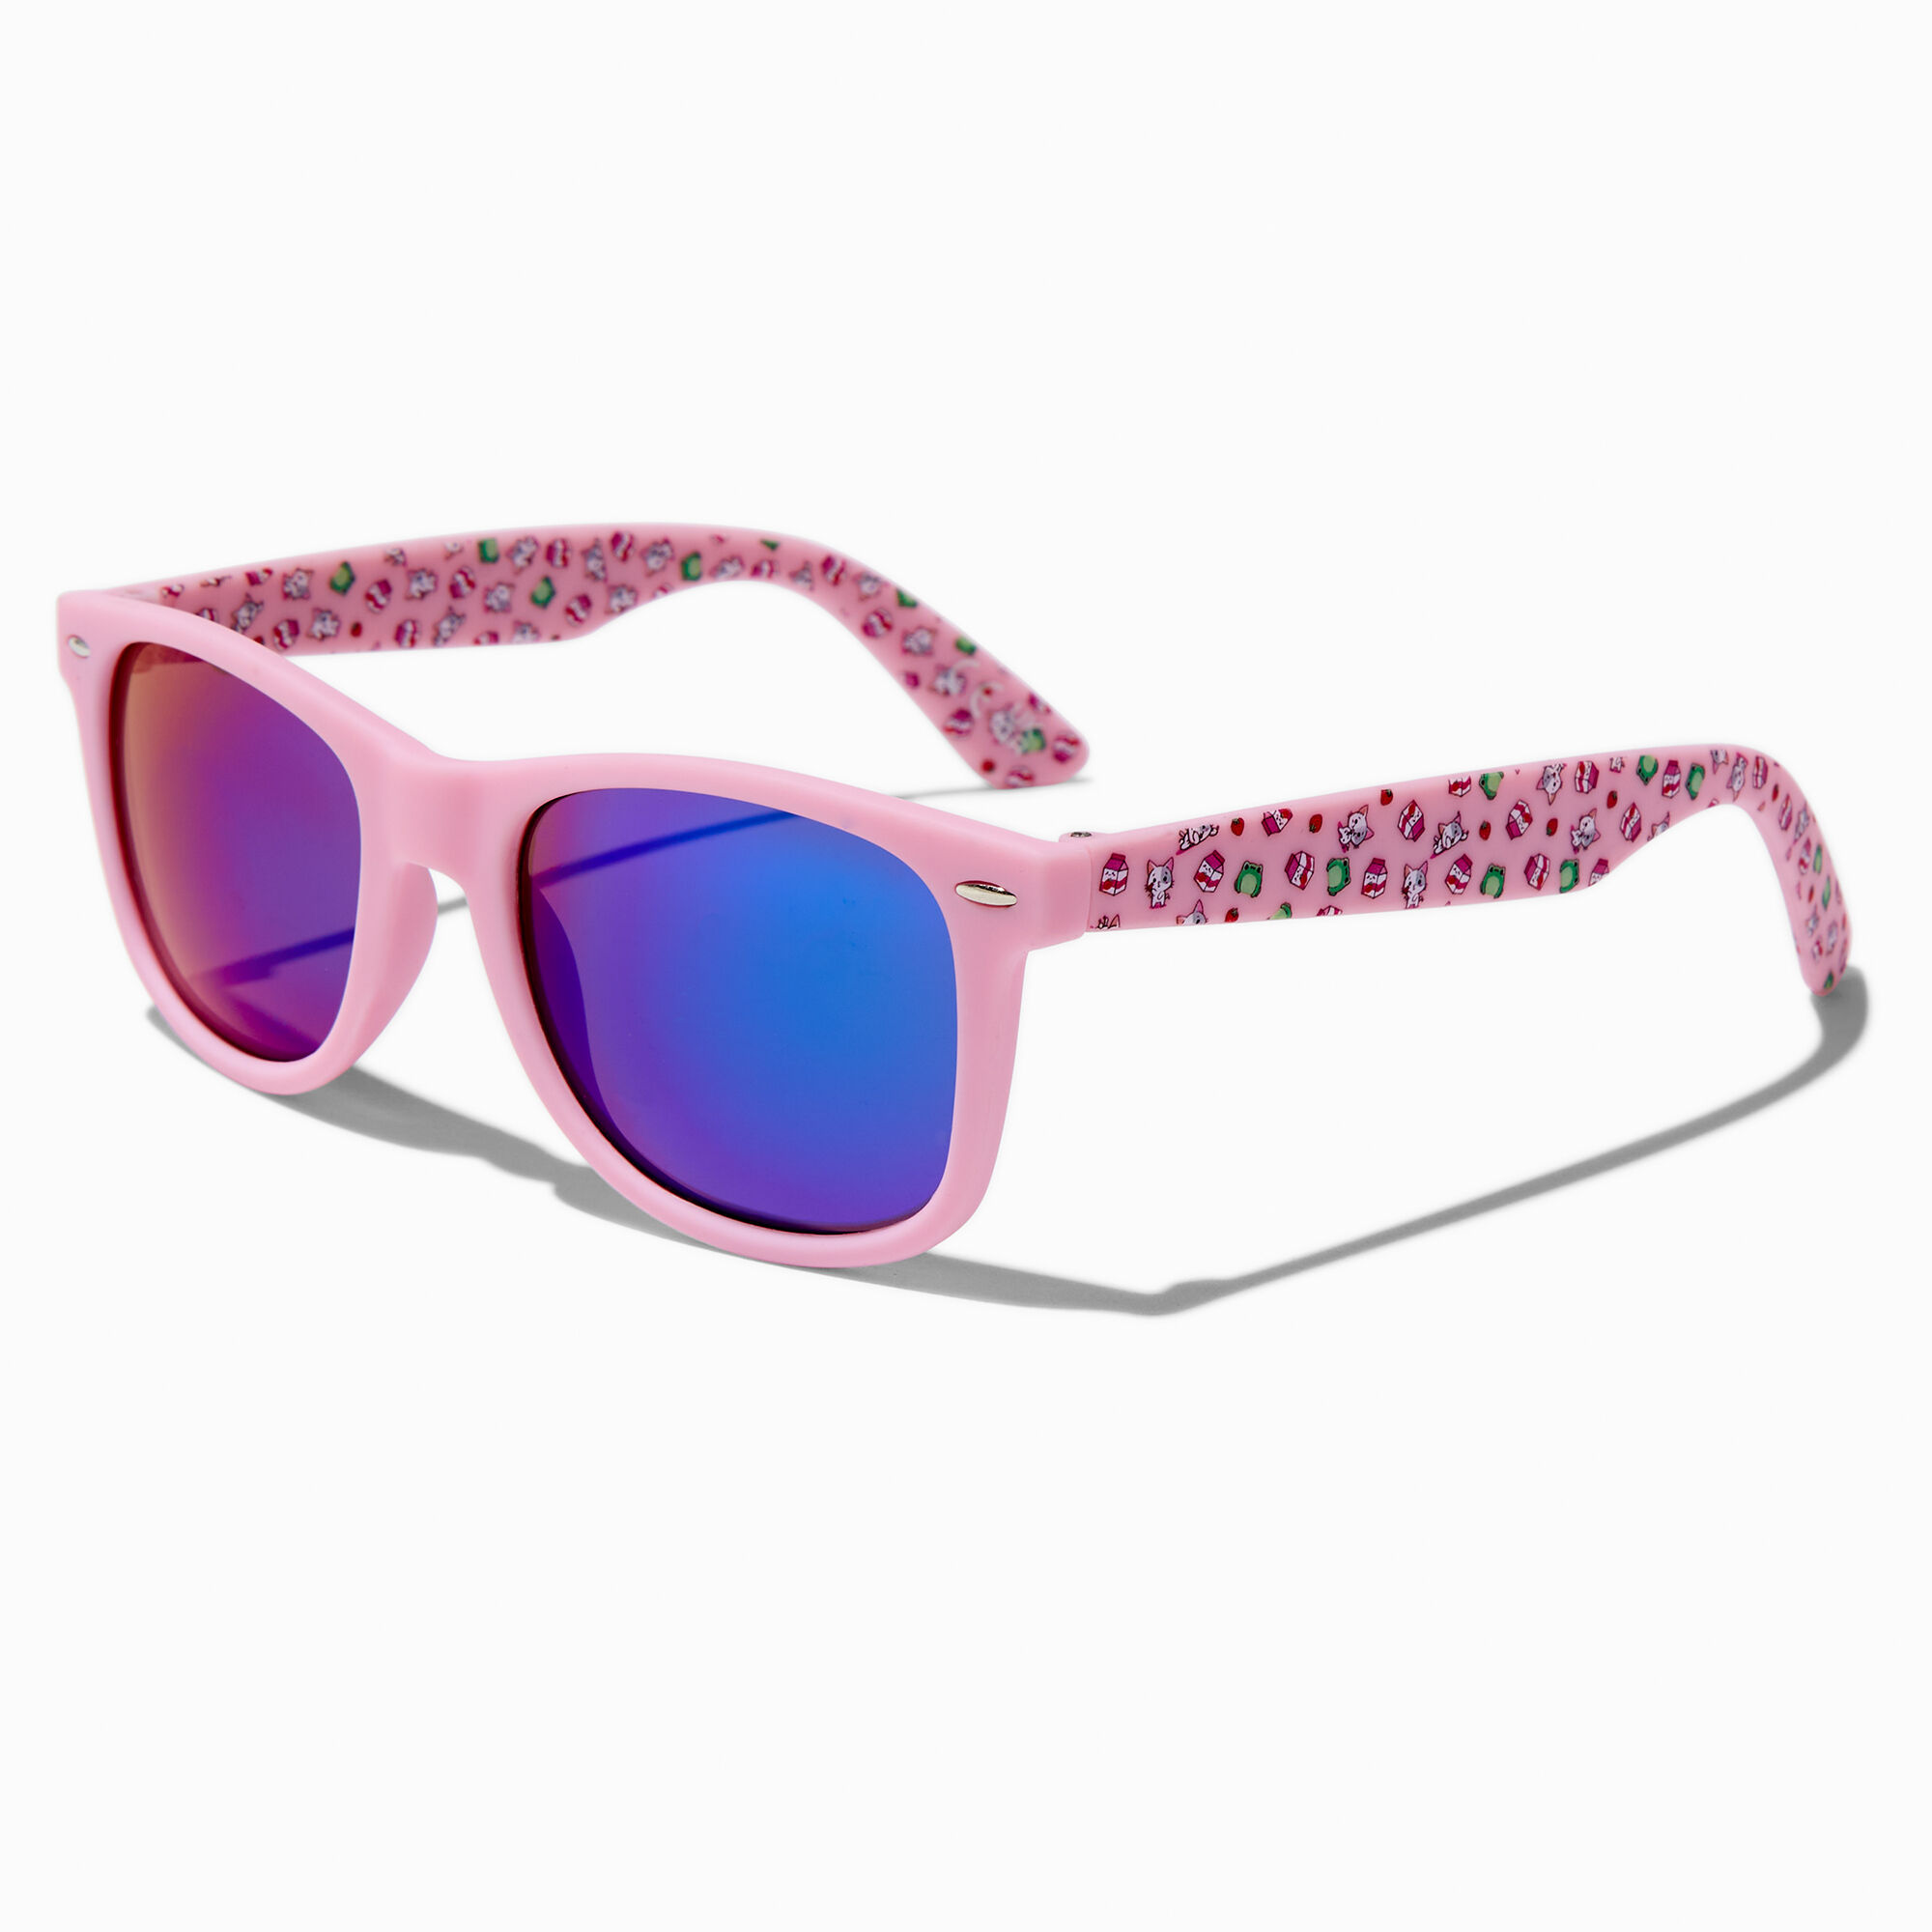 View Claires Strawberry Milk Mirrored Sunglasses Pink information